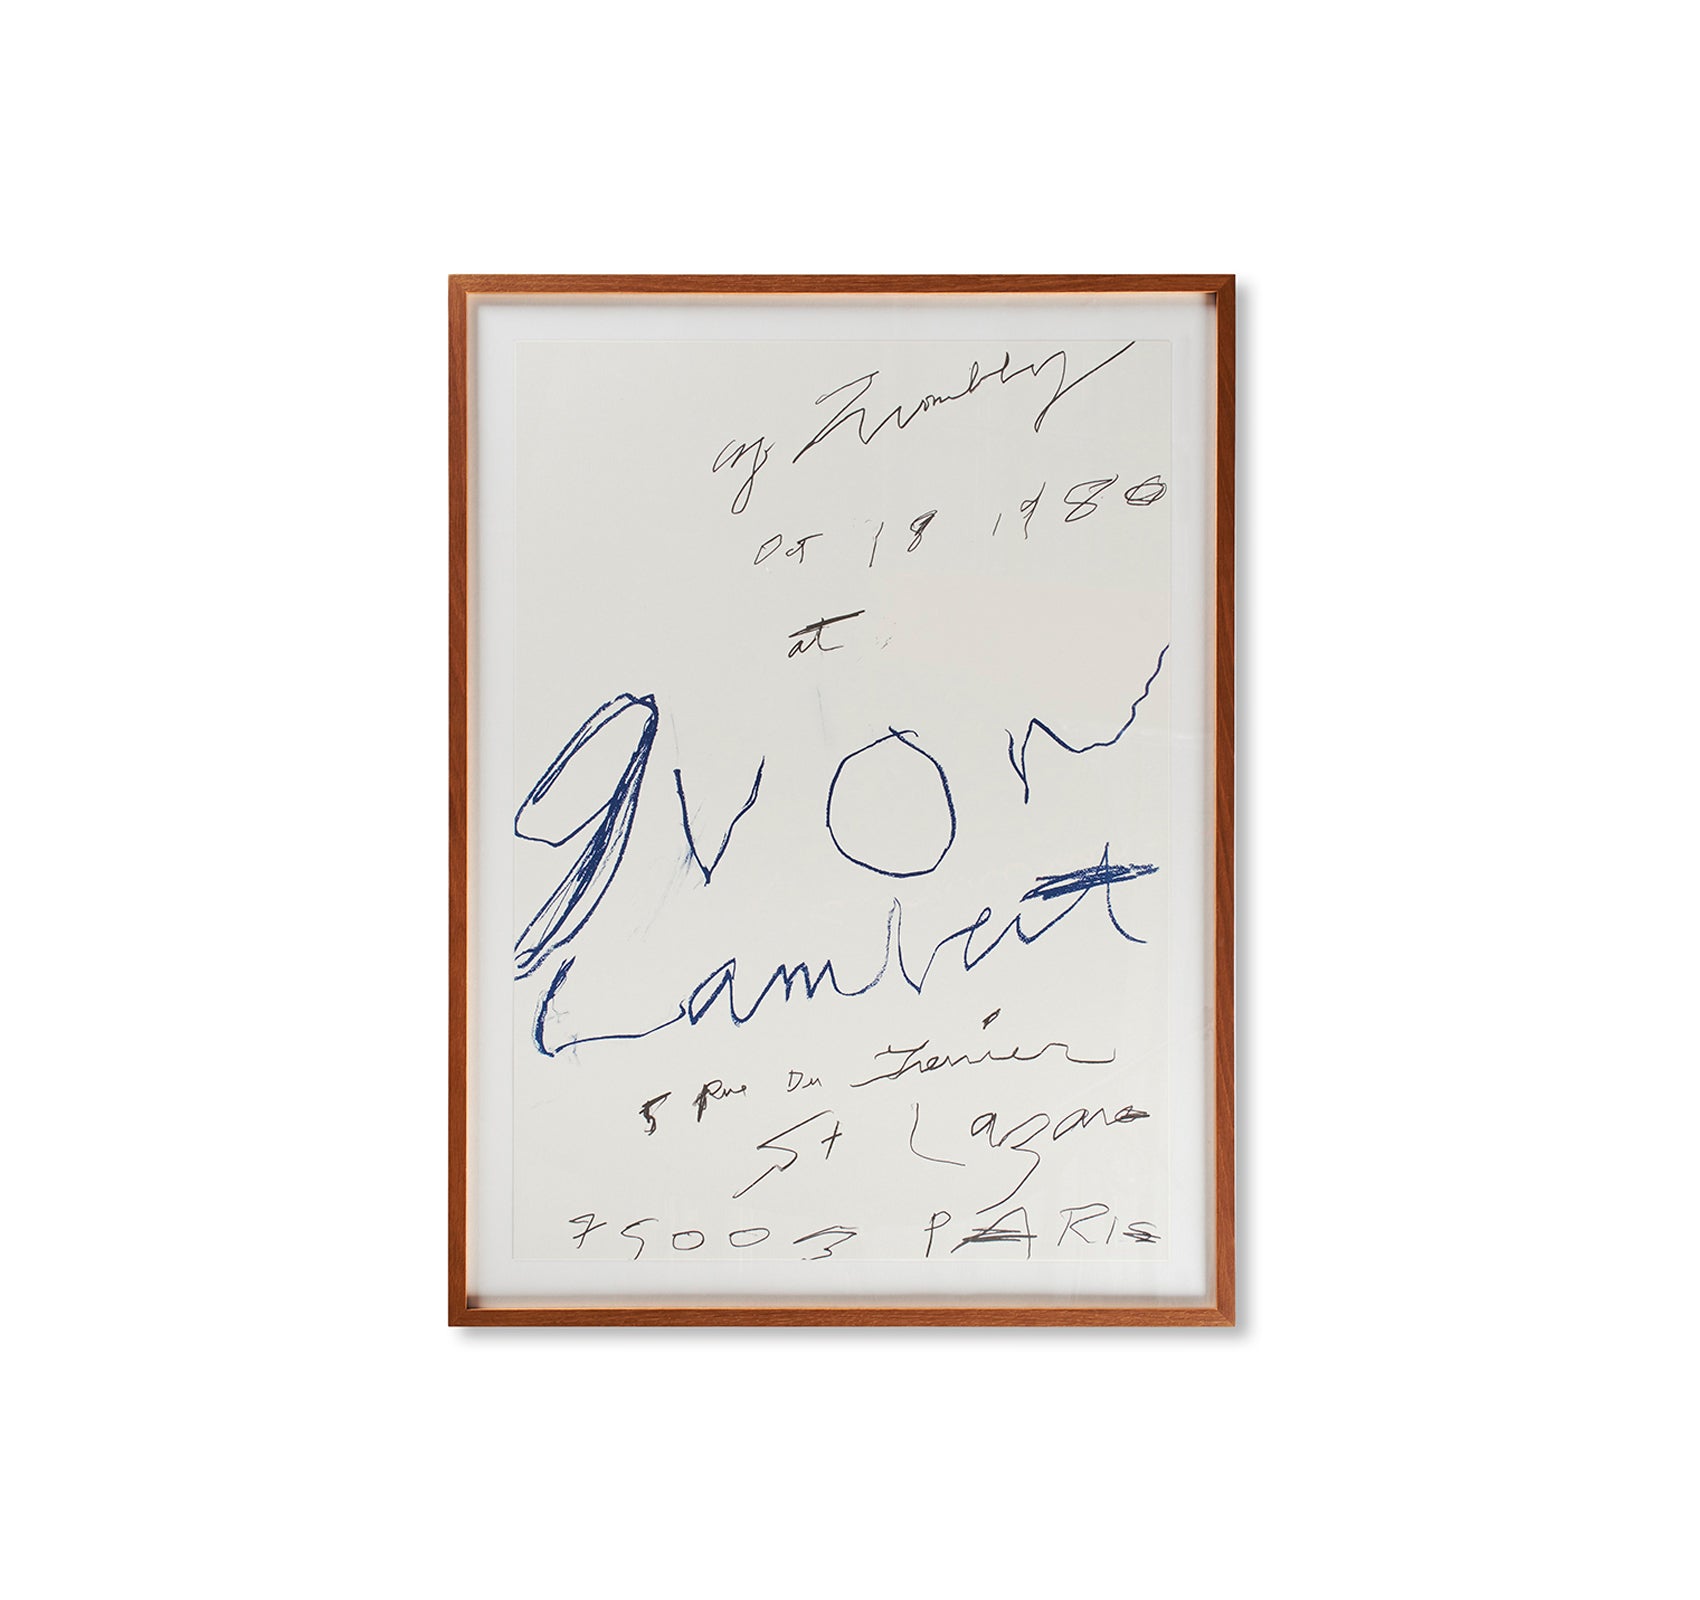 PRINT (1980) by Cy Twombly [REPRINTED EDITION]